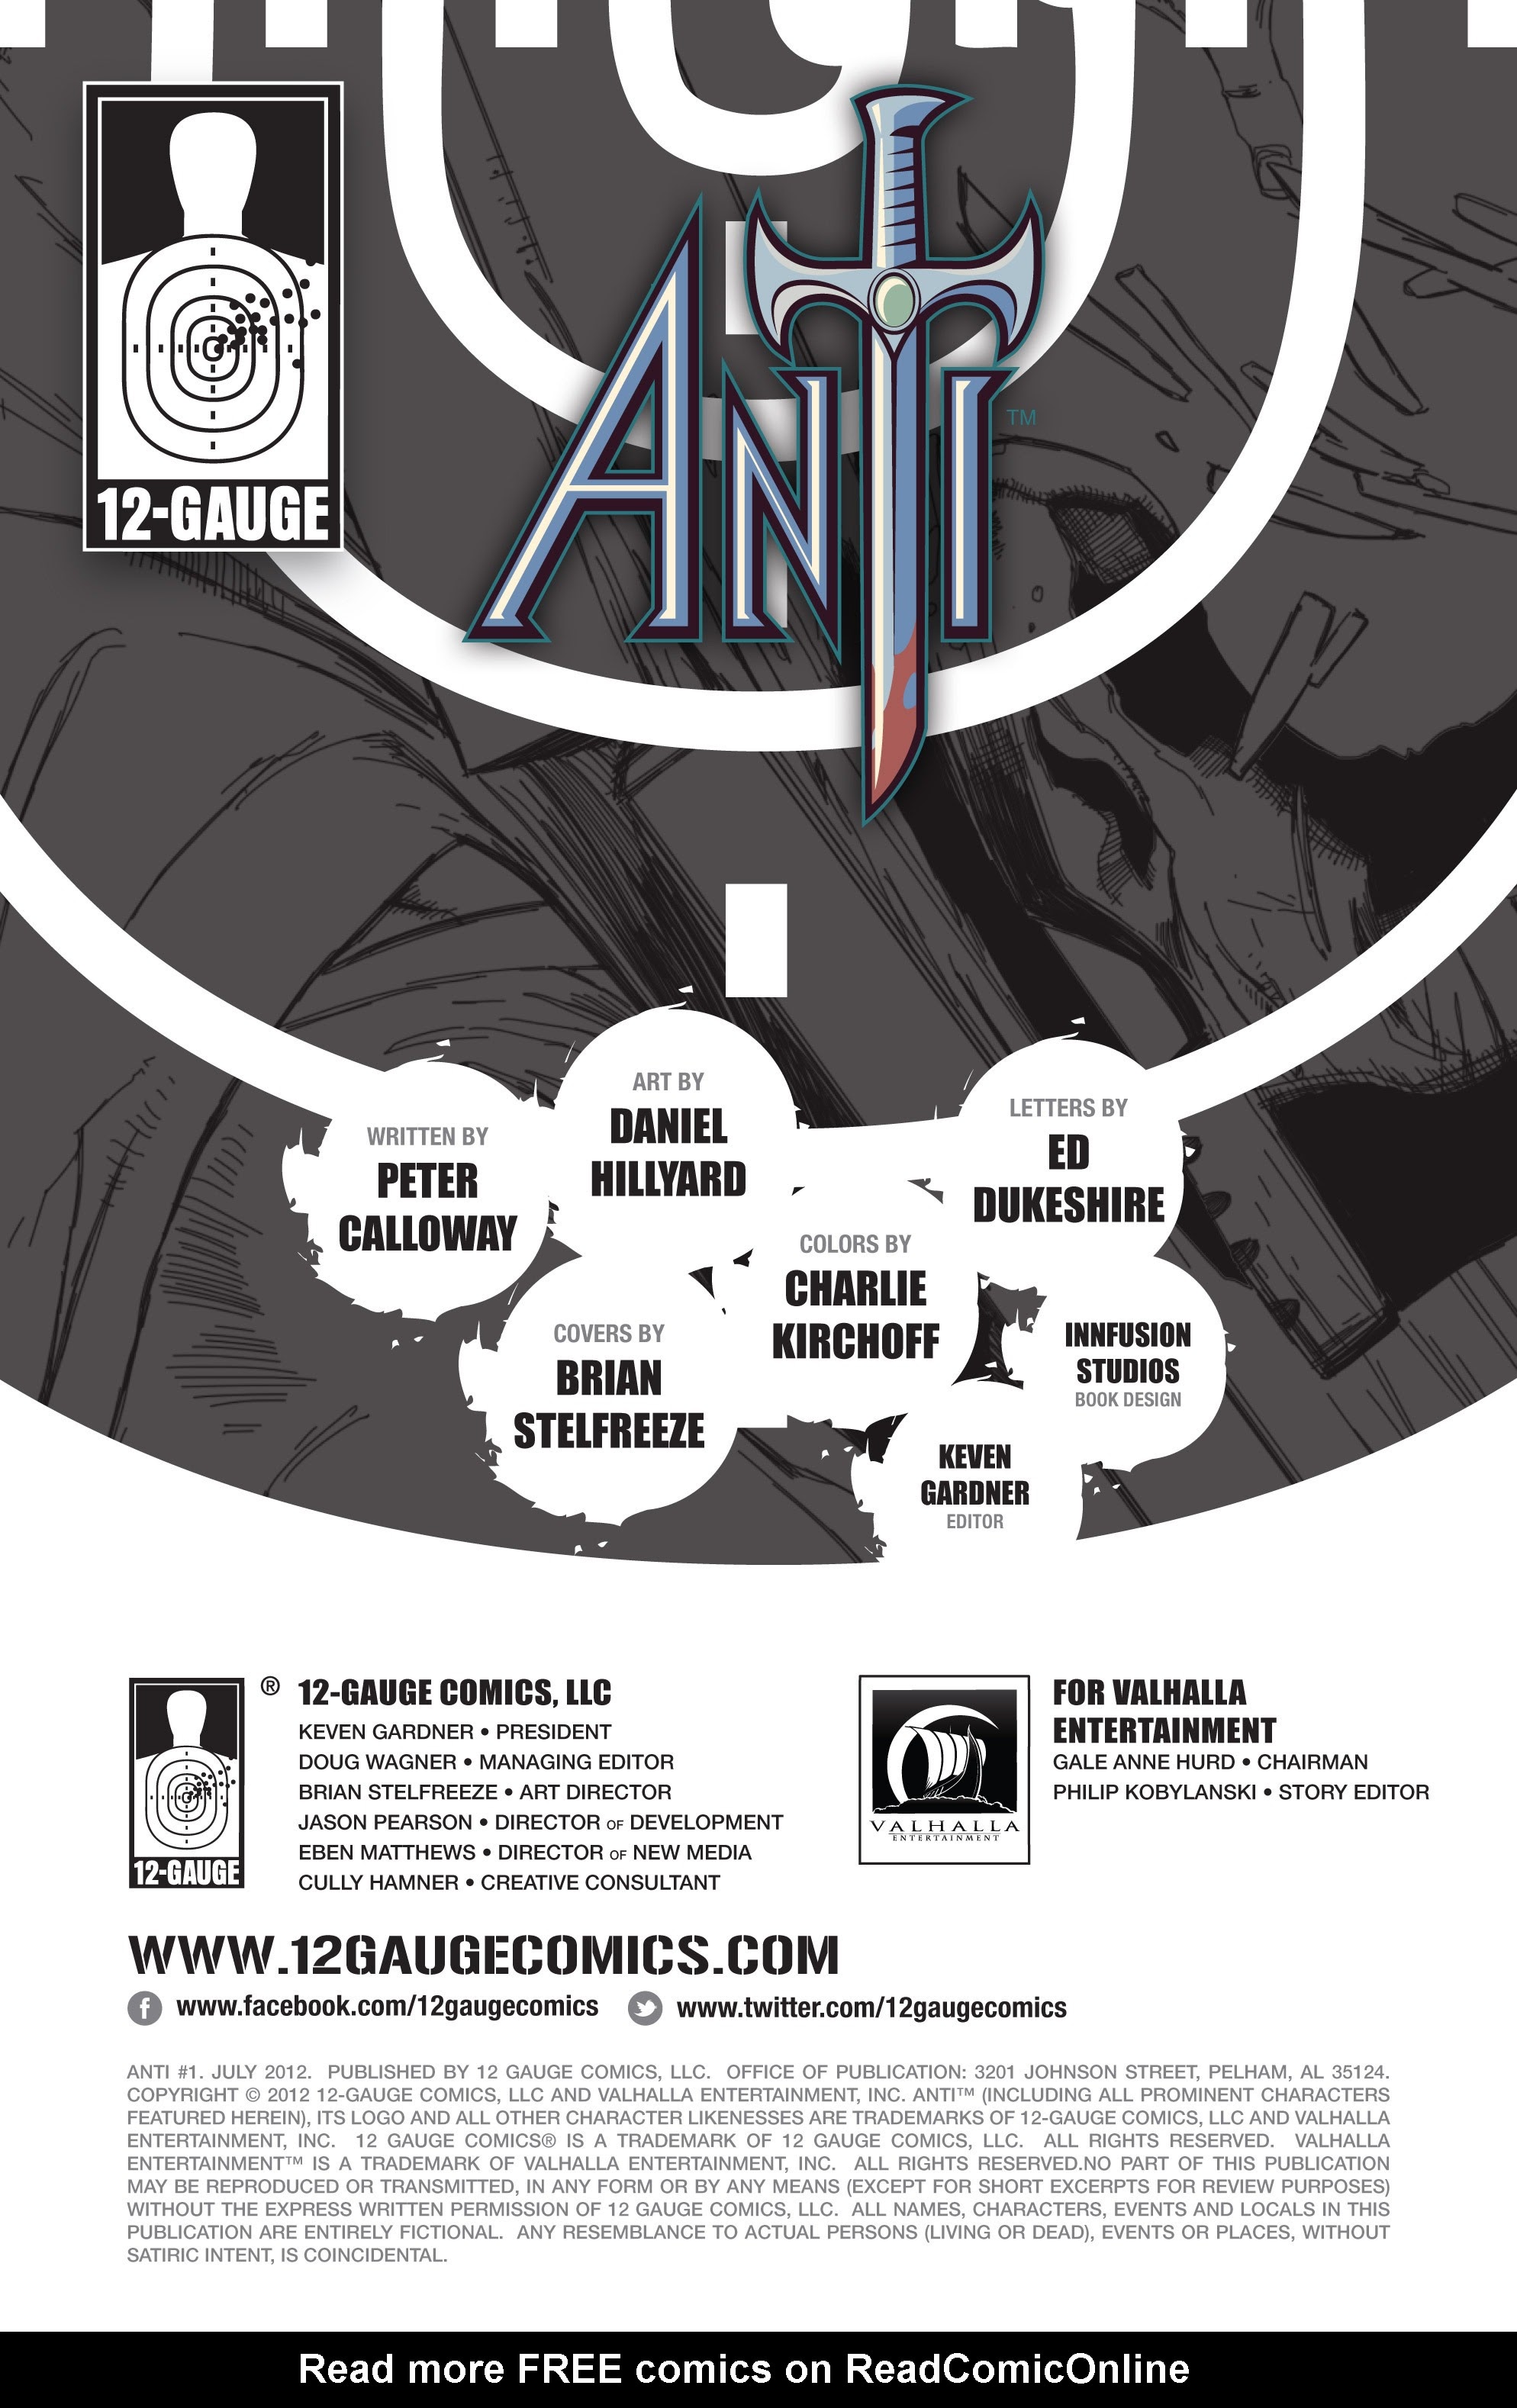 Read online Anti comic -  Issue #1 - 2